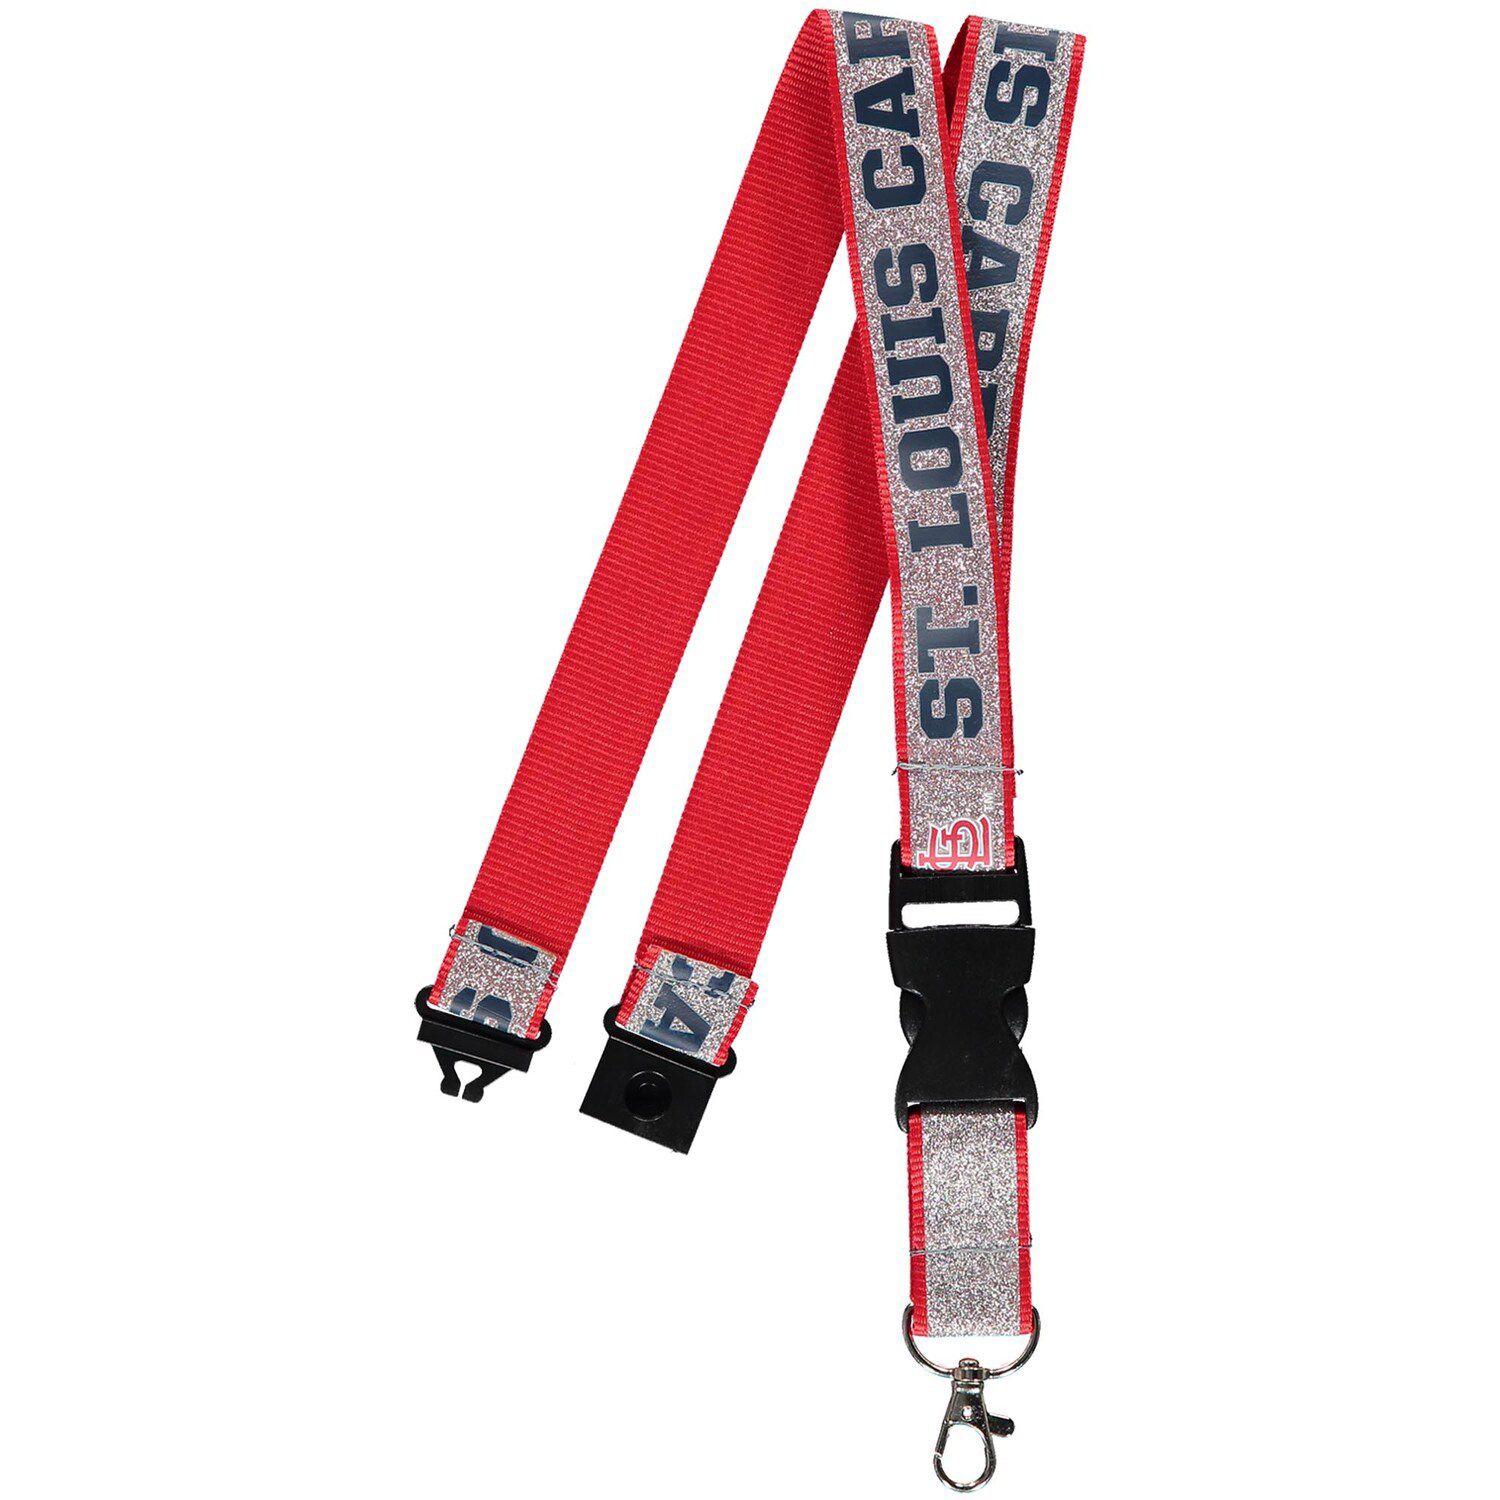 Florida Panthers Keychain Lanyard w/Detachable Buckle - Red/Navy